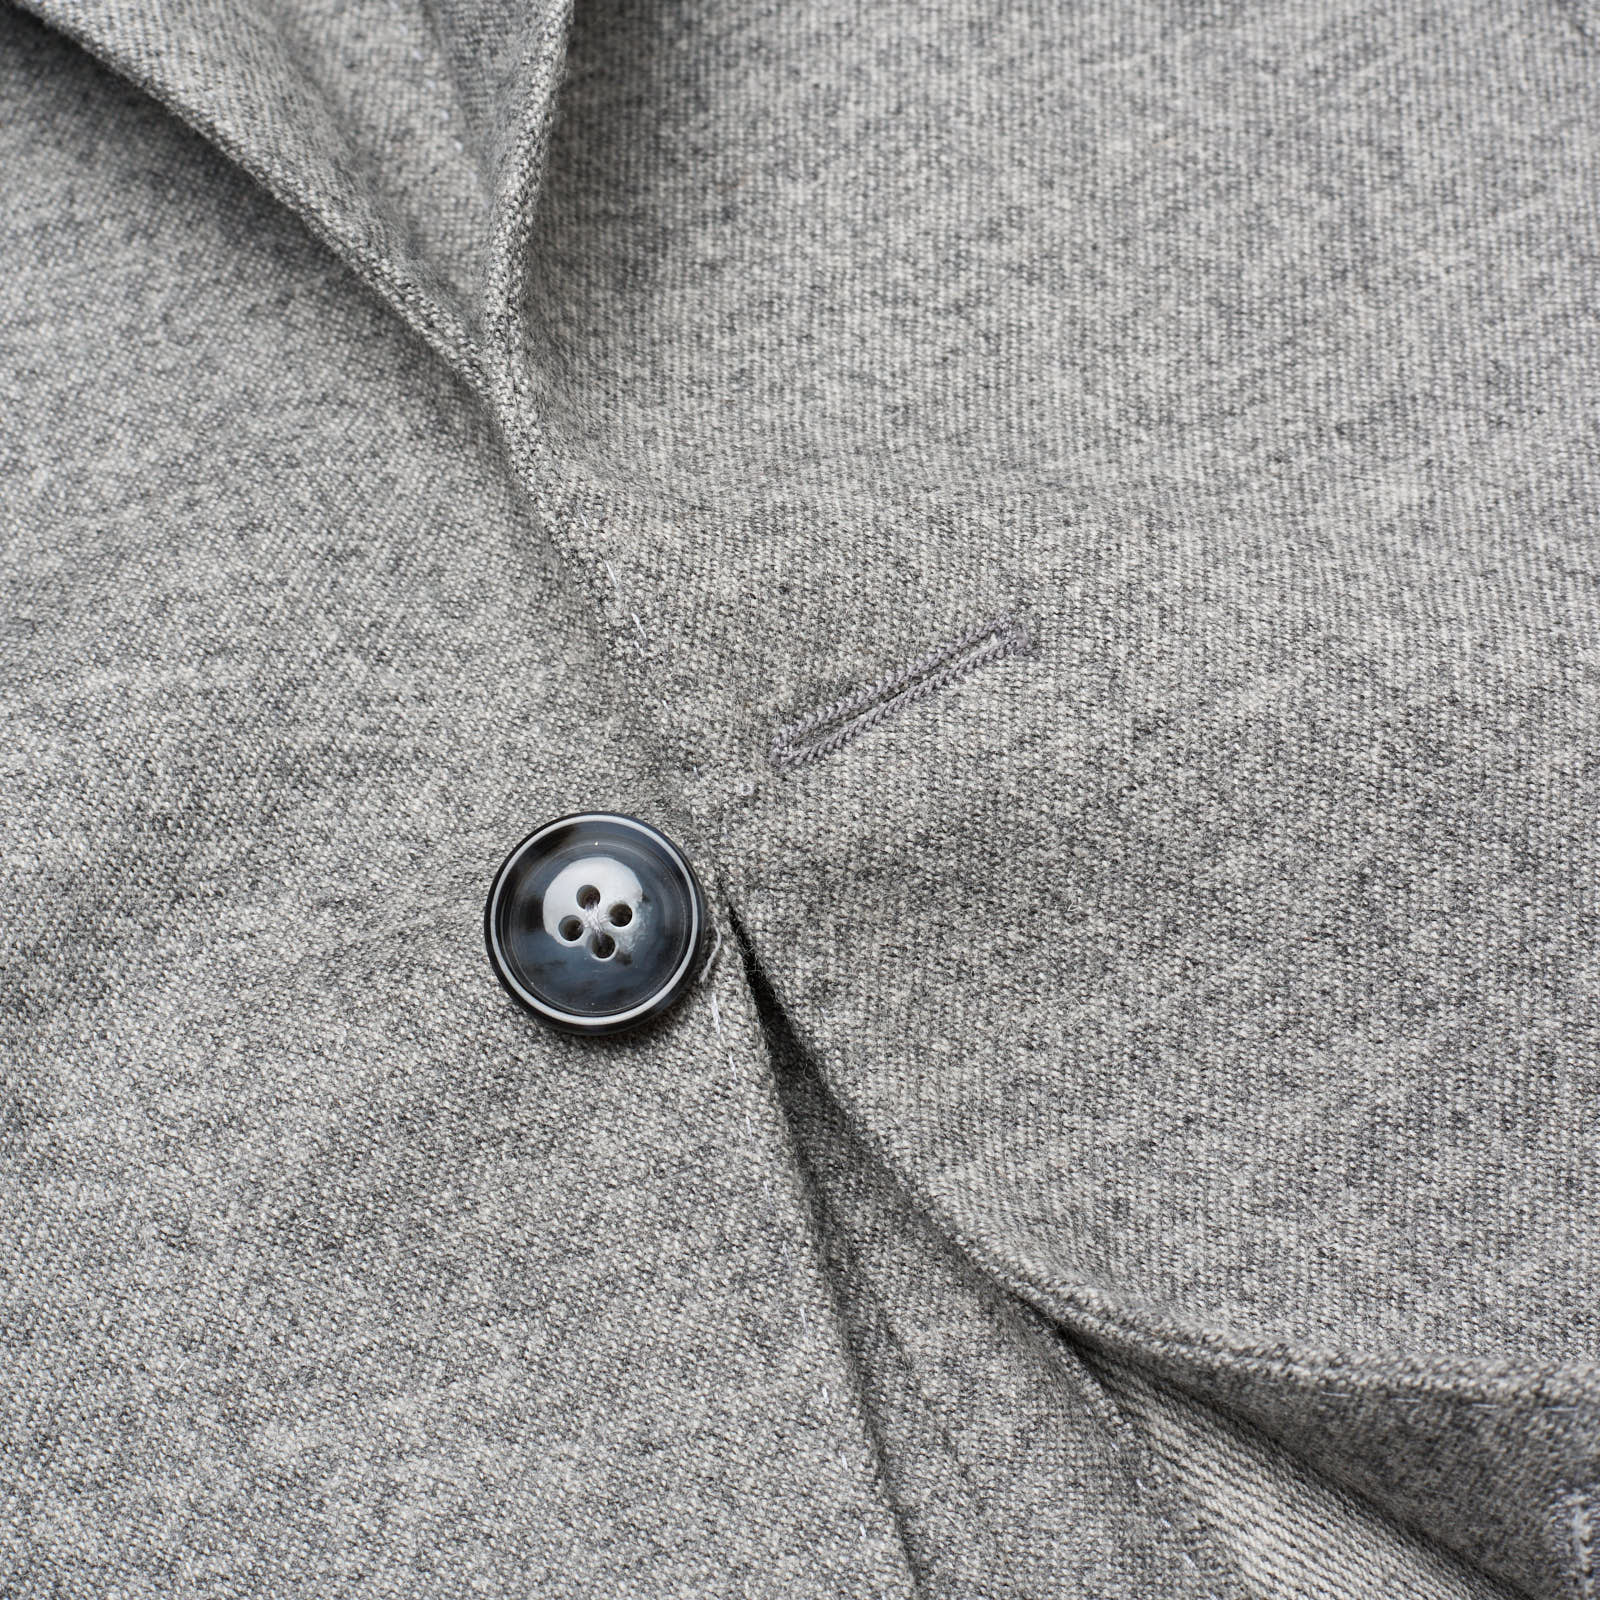 SARTORIA PARTENOPEA Gray Wool-Cashmere Unlined Jacket NEW  Current Model